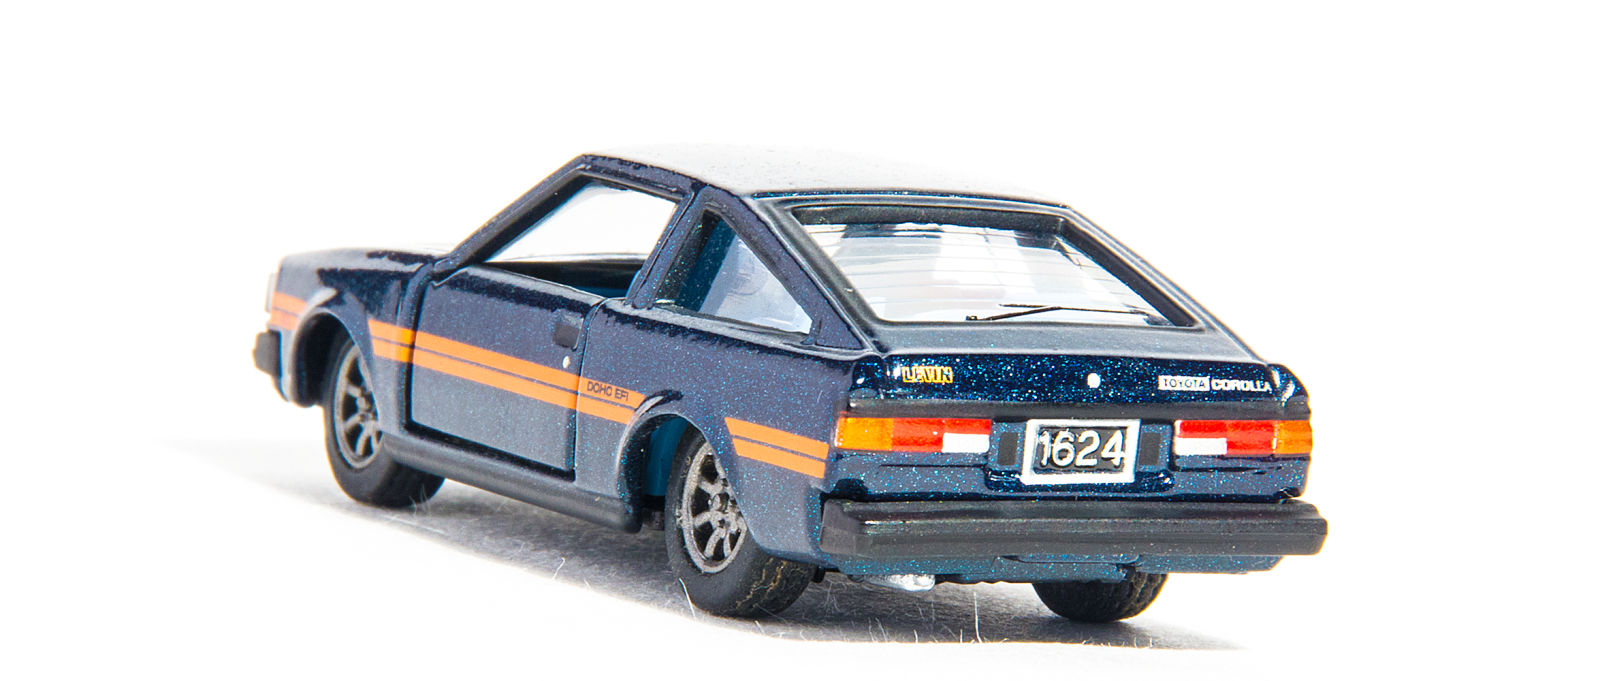 Illustration for article titled Tomica of the Day (Where my username came from)